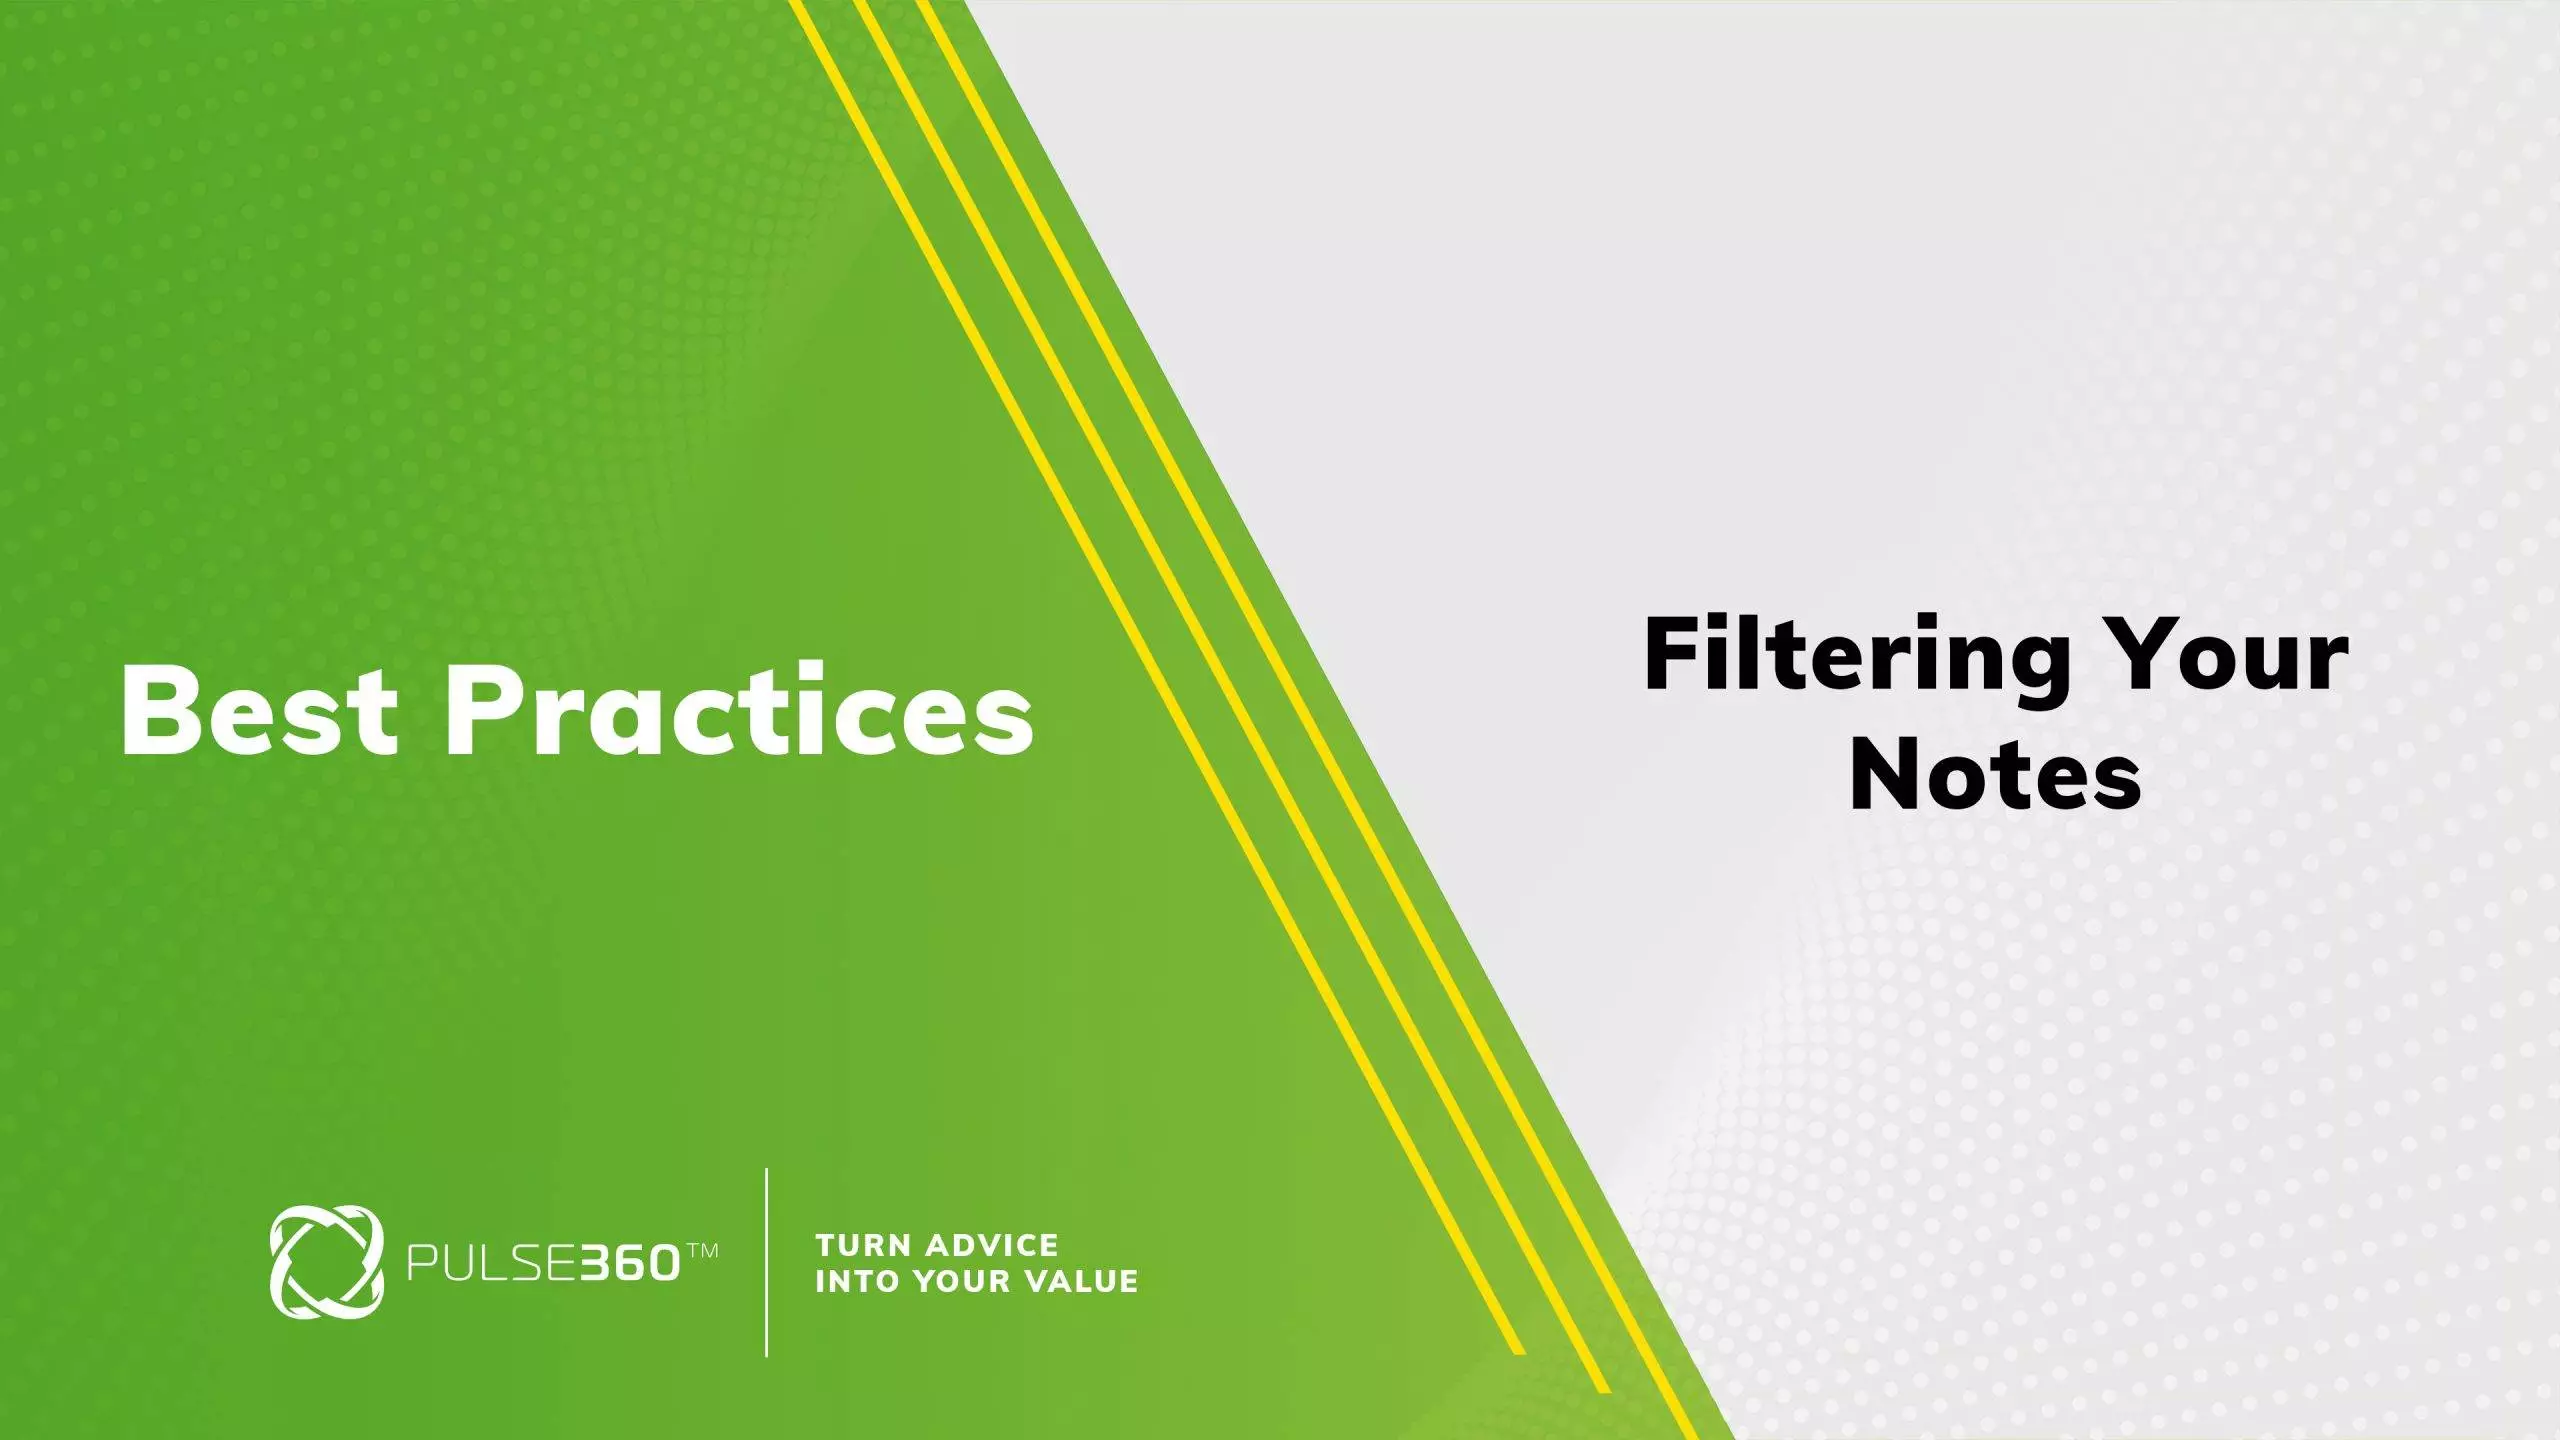 filtering notes in Pulse360